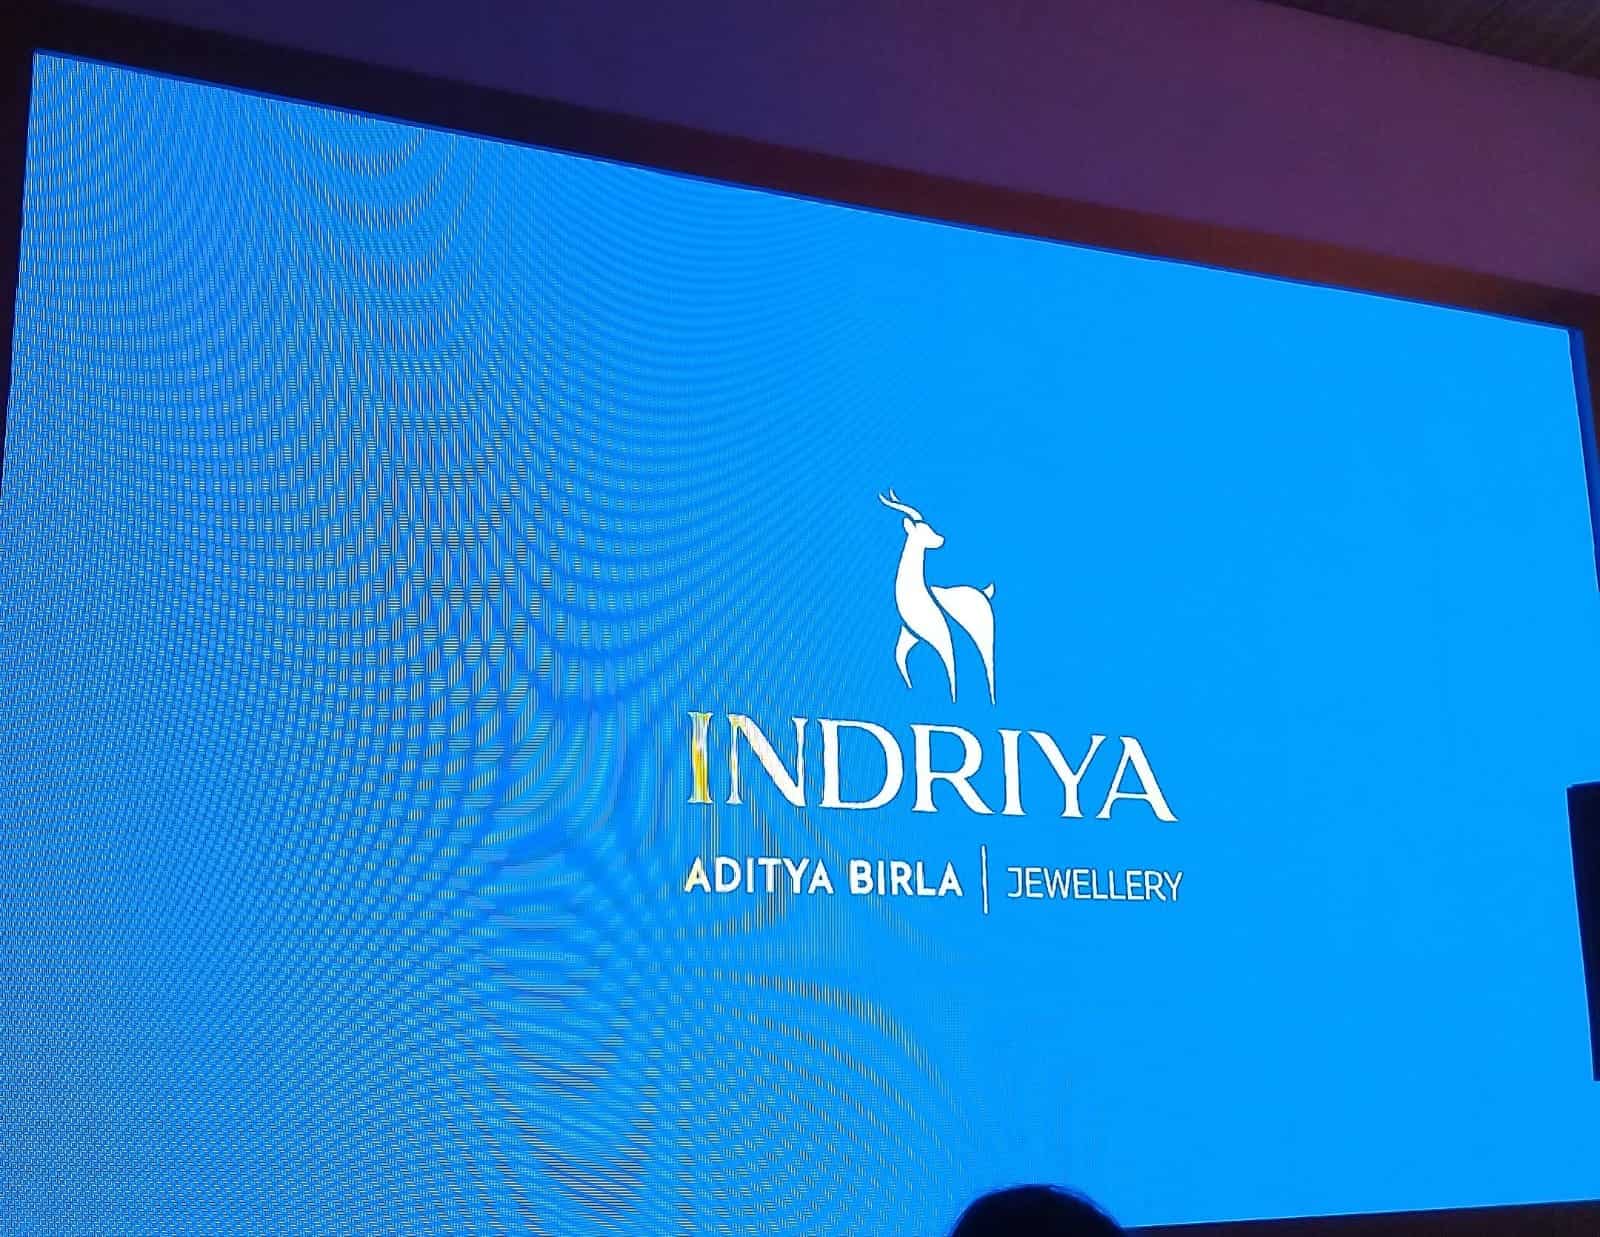 Aditya Birla Group launches retail jewellery brand INDRIYA, plans to open stories in over 10 cities in 6 months